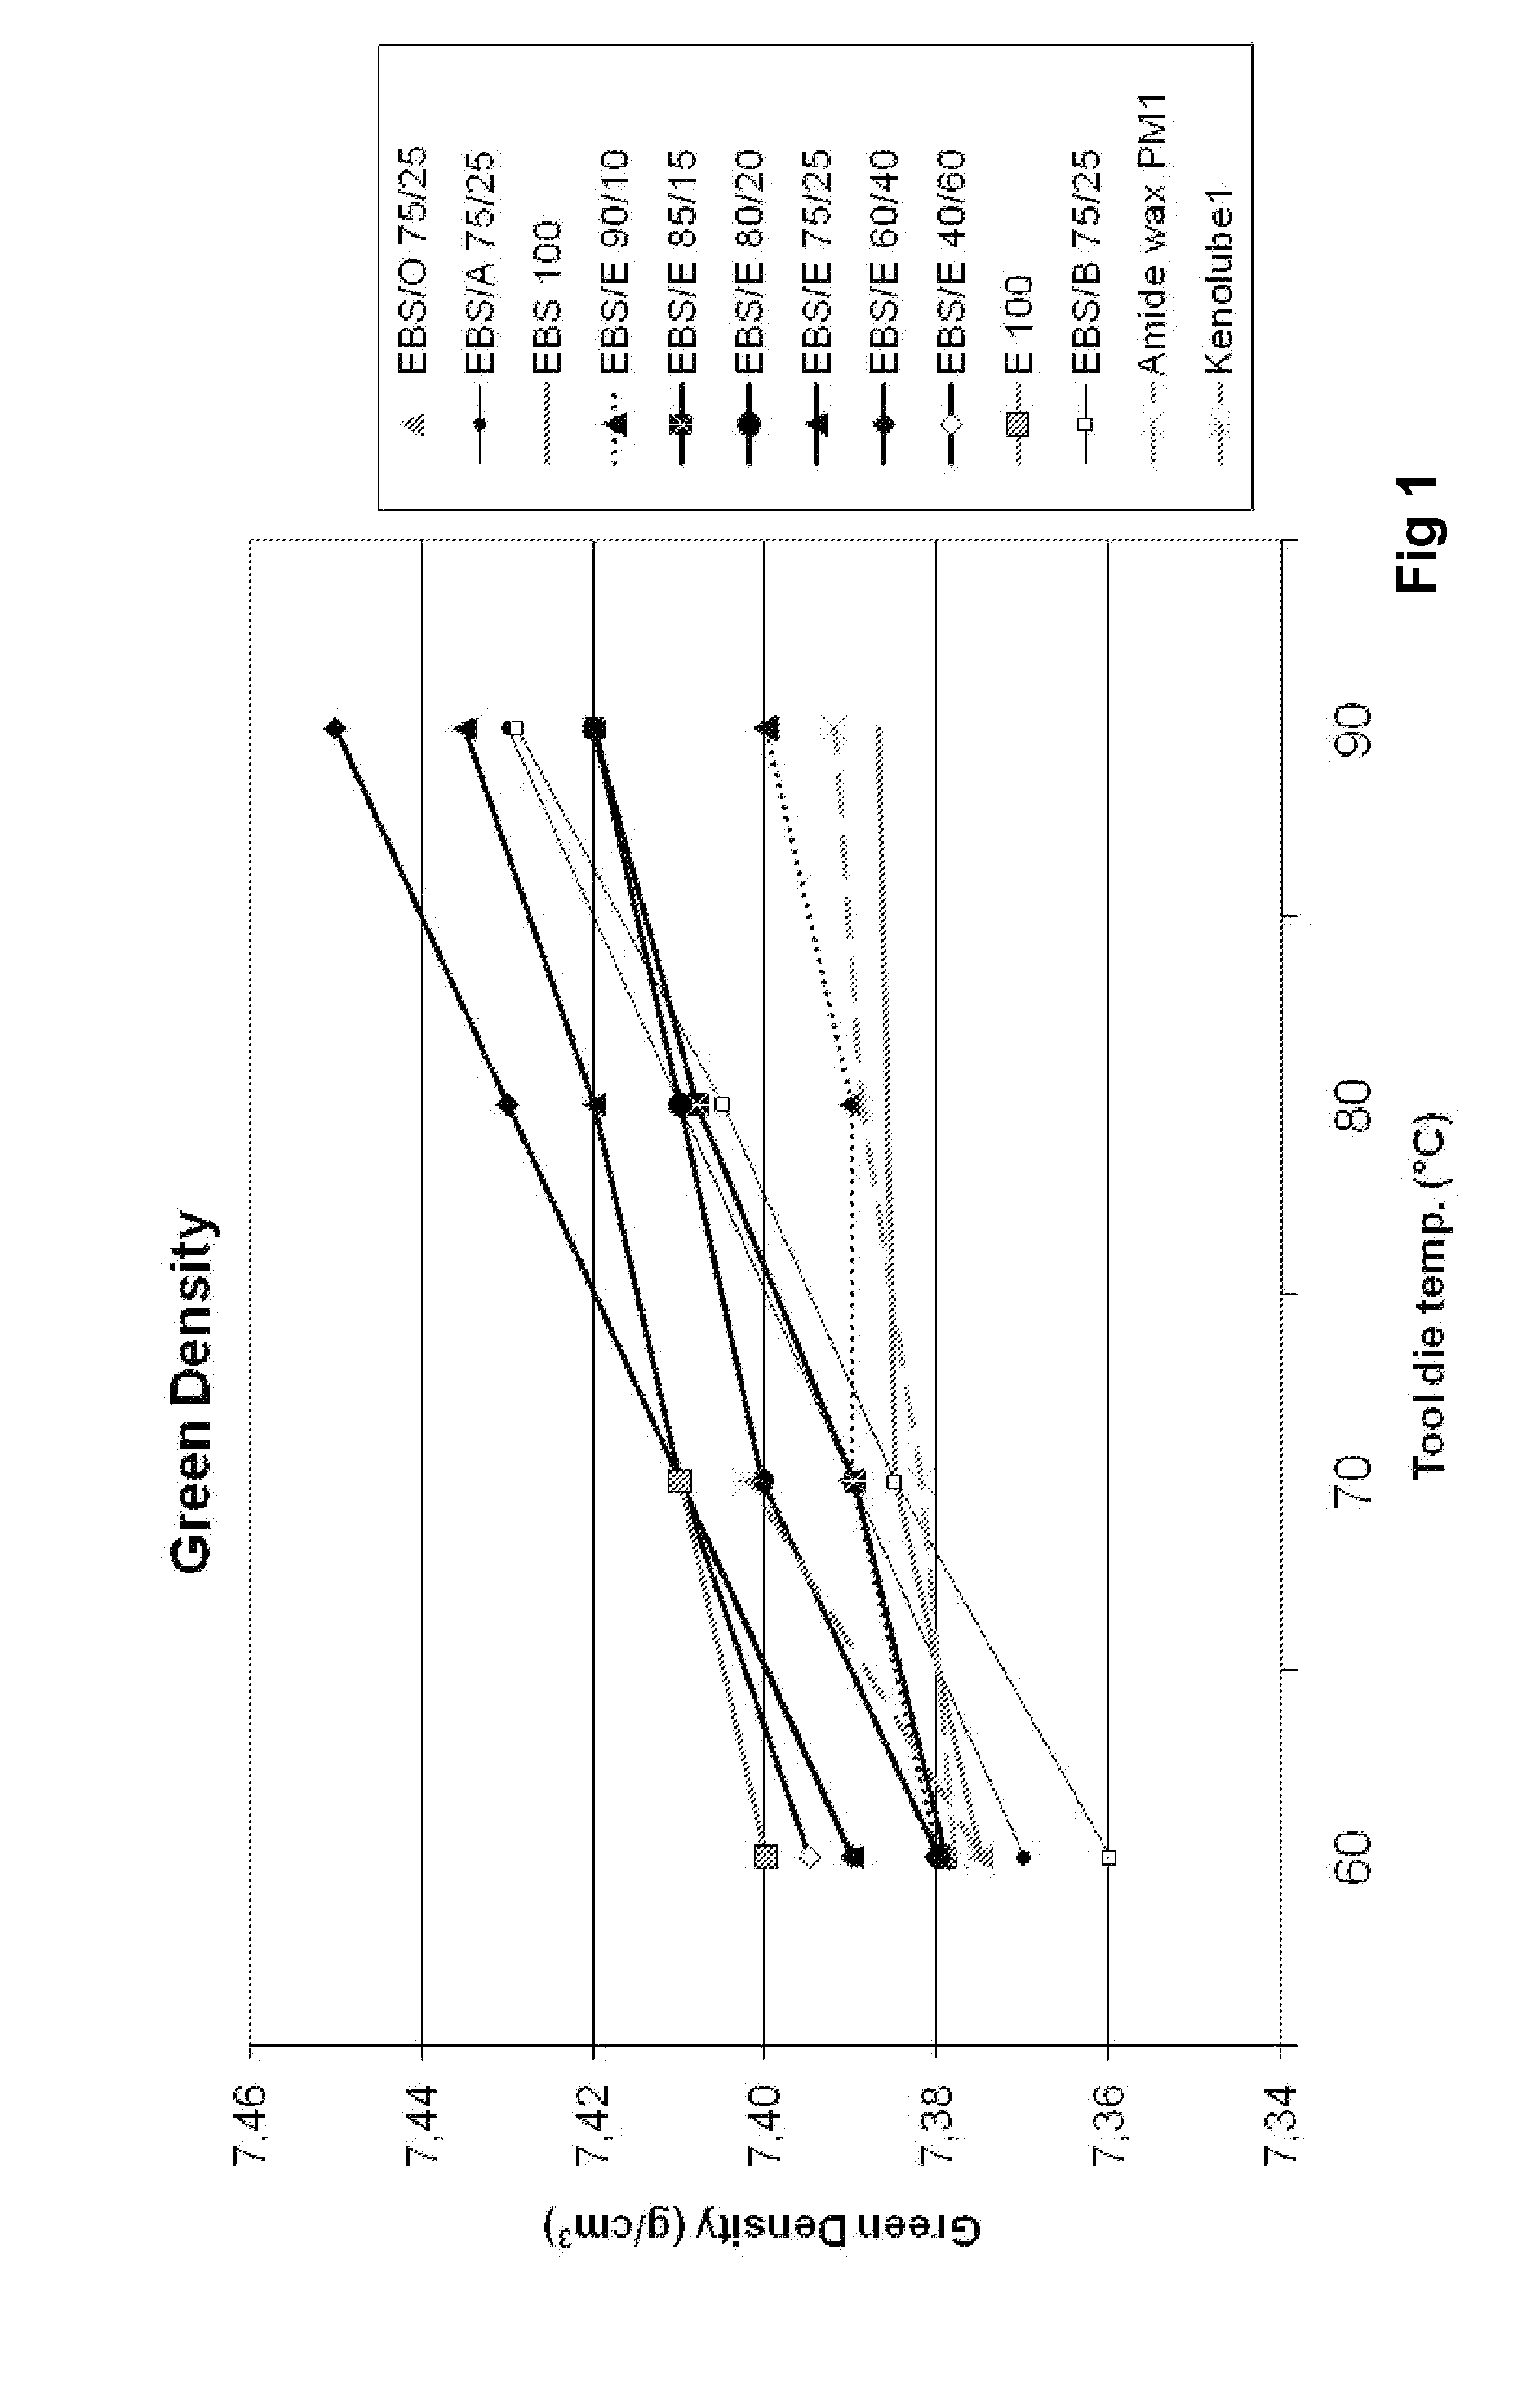 Lubricant for powder metallurgical compositions